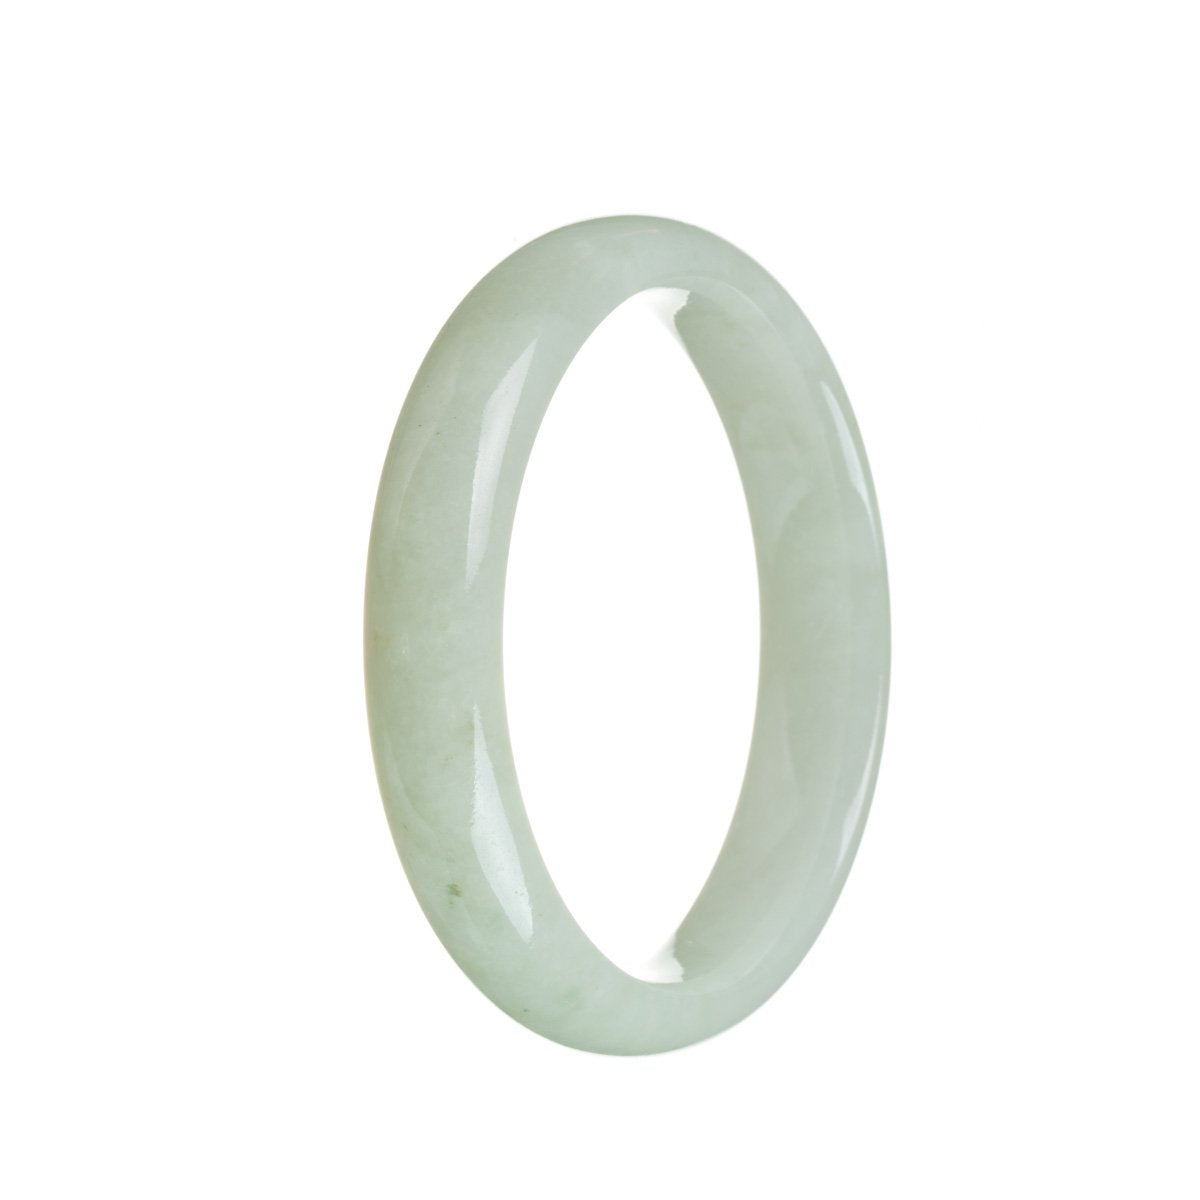 A half-moon shaped white jadeite jade bracelet, crafted from genuine grade A jade. The bracelet has a diameter of 56mm and is beautifully designed by MAYS.